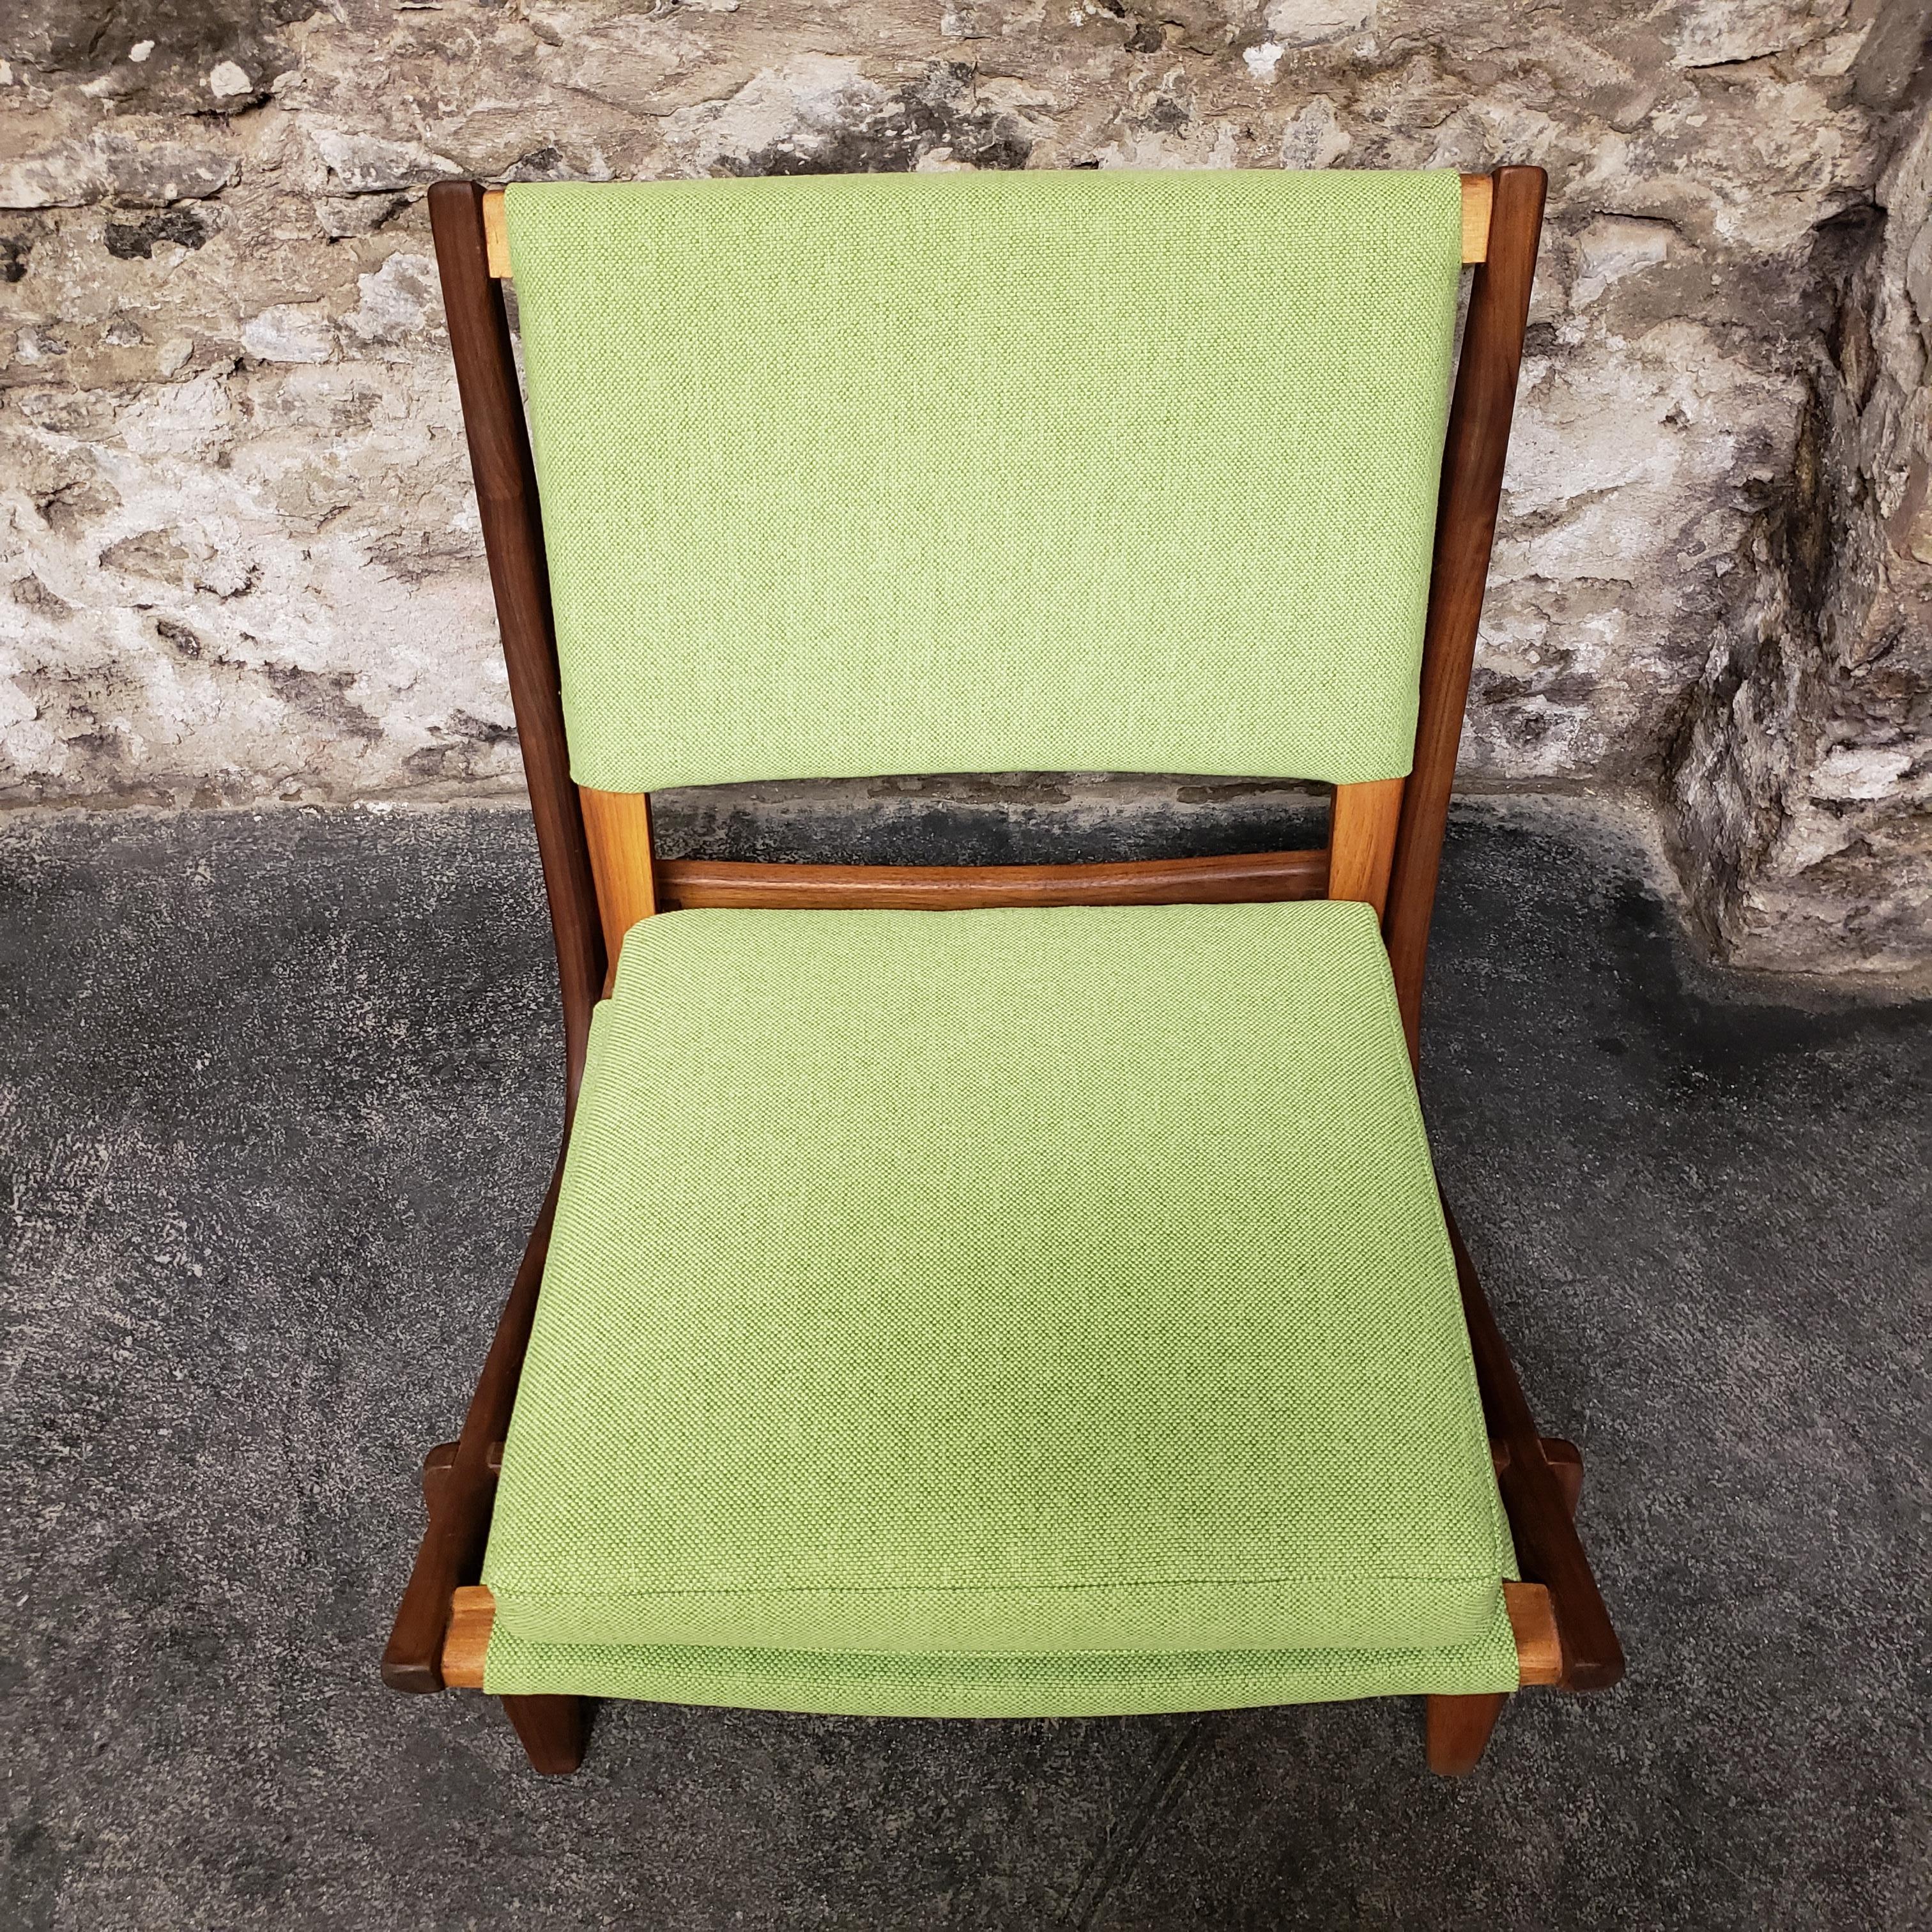 Upholstery Presens Lounge Chair by Bertil W. Behrman for AB Engens Fabriker